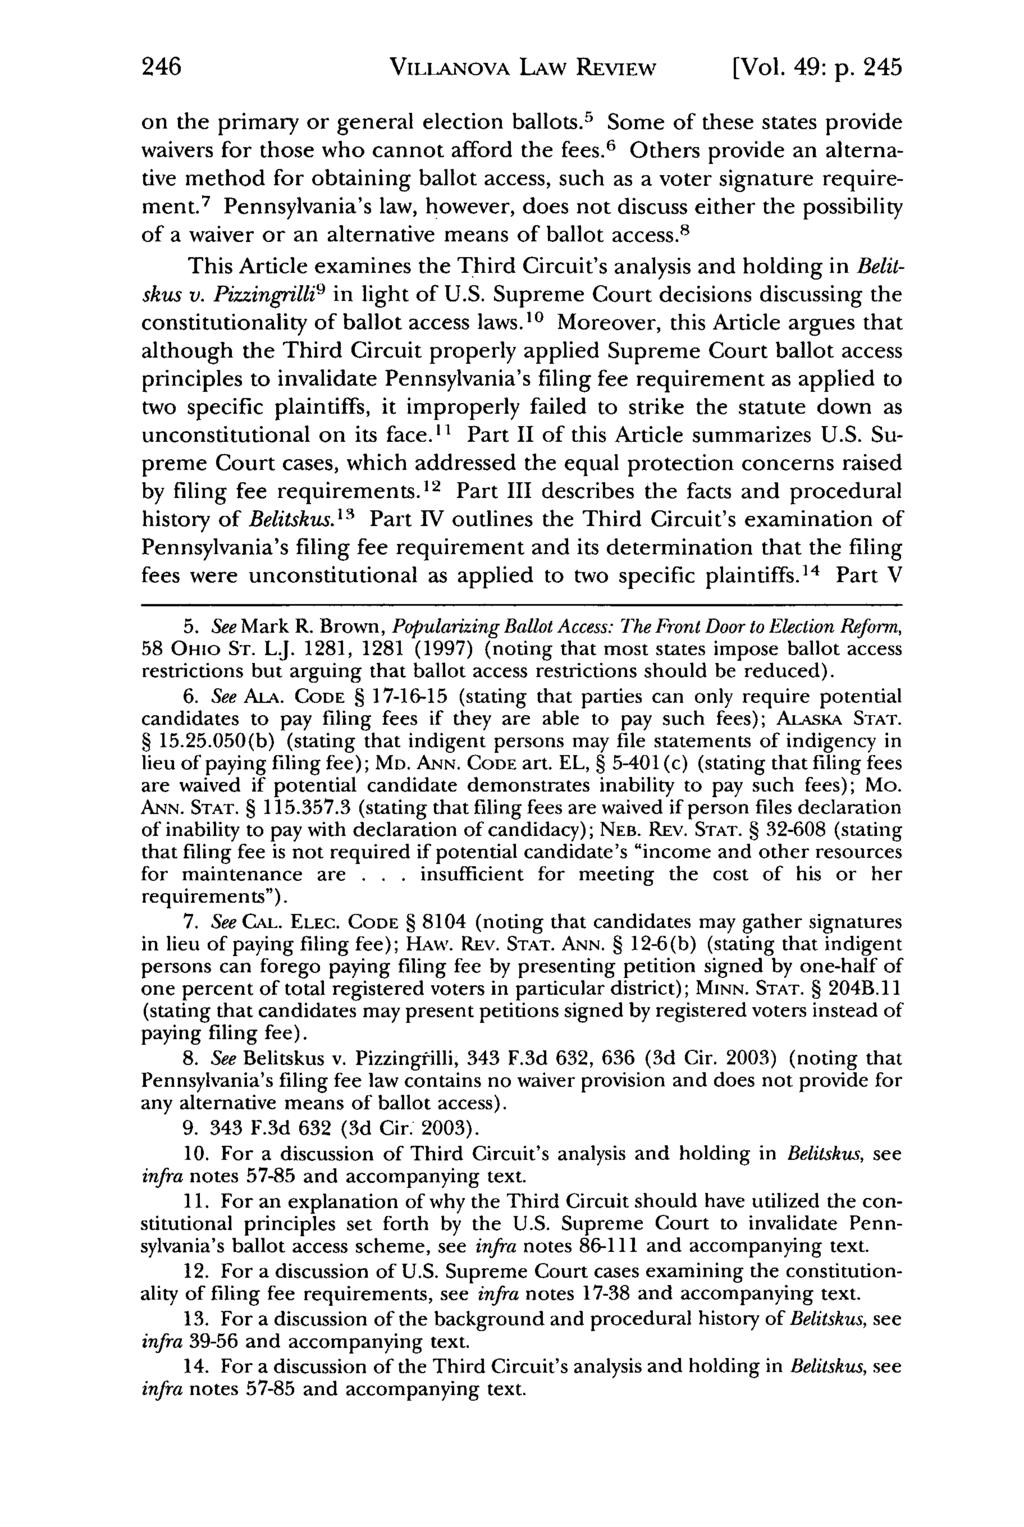 246 Villanova Law Review, Vol. 49, Iss. 1 [2004], Art. 7 VILLANOVA LAW REVIEW [Vol. 49: p. 245 on the primary or general election ballots.